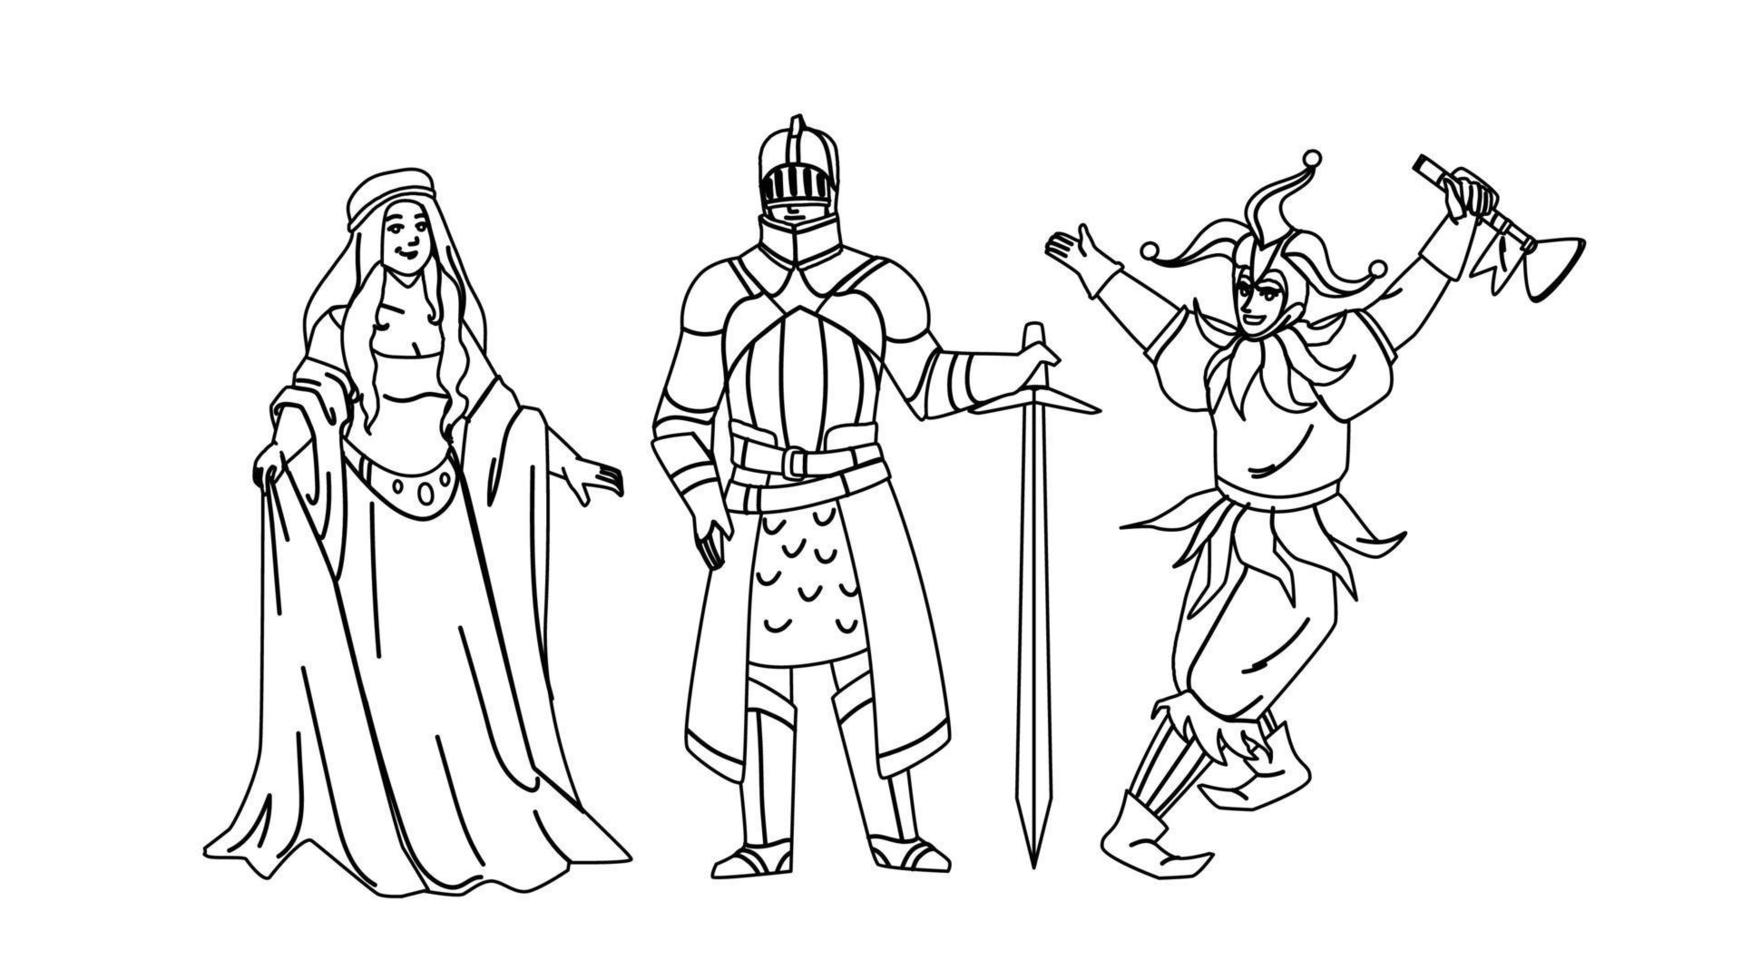 Medieval People Lady, Knight And Jester Vector